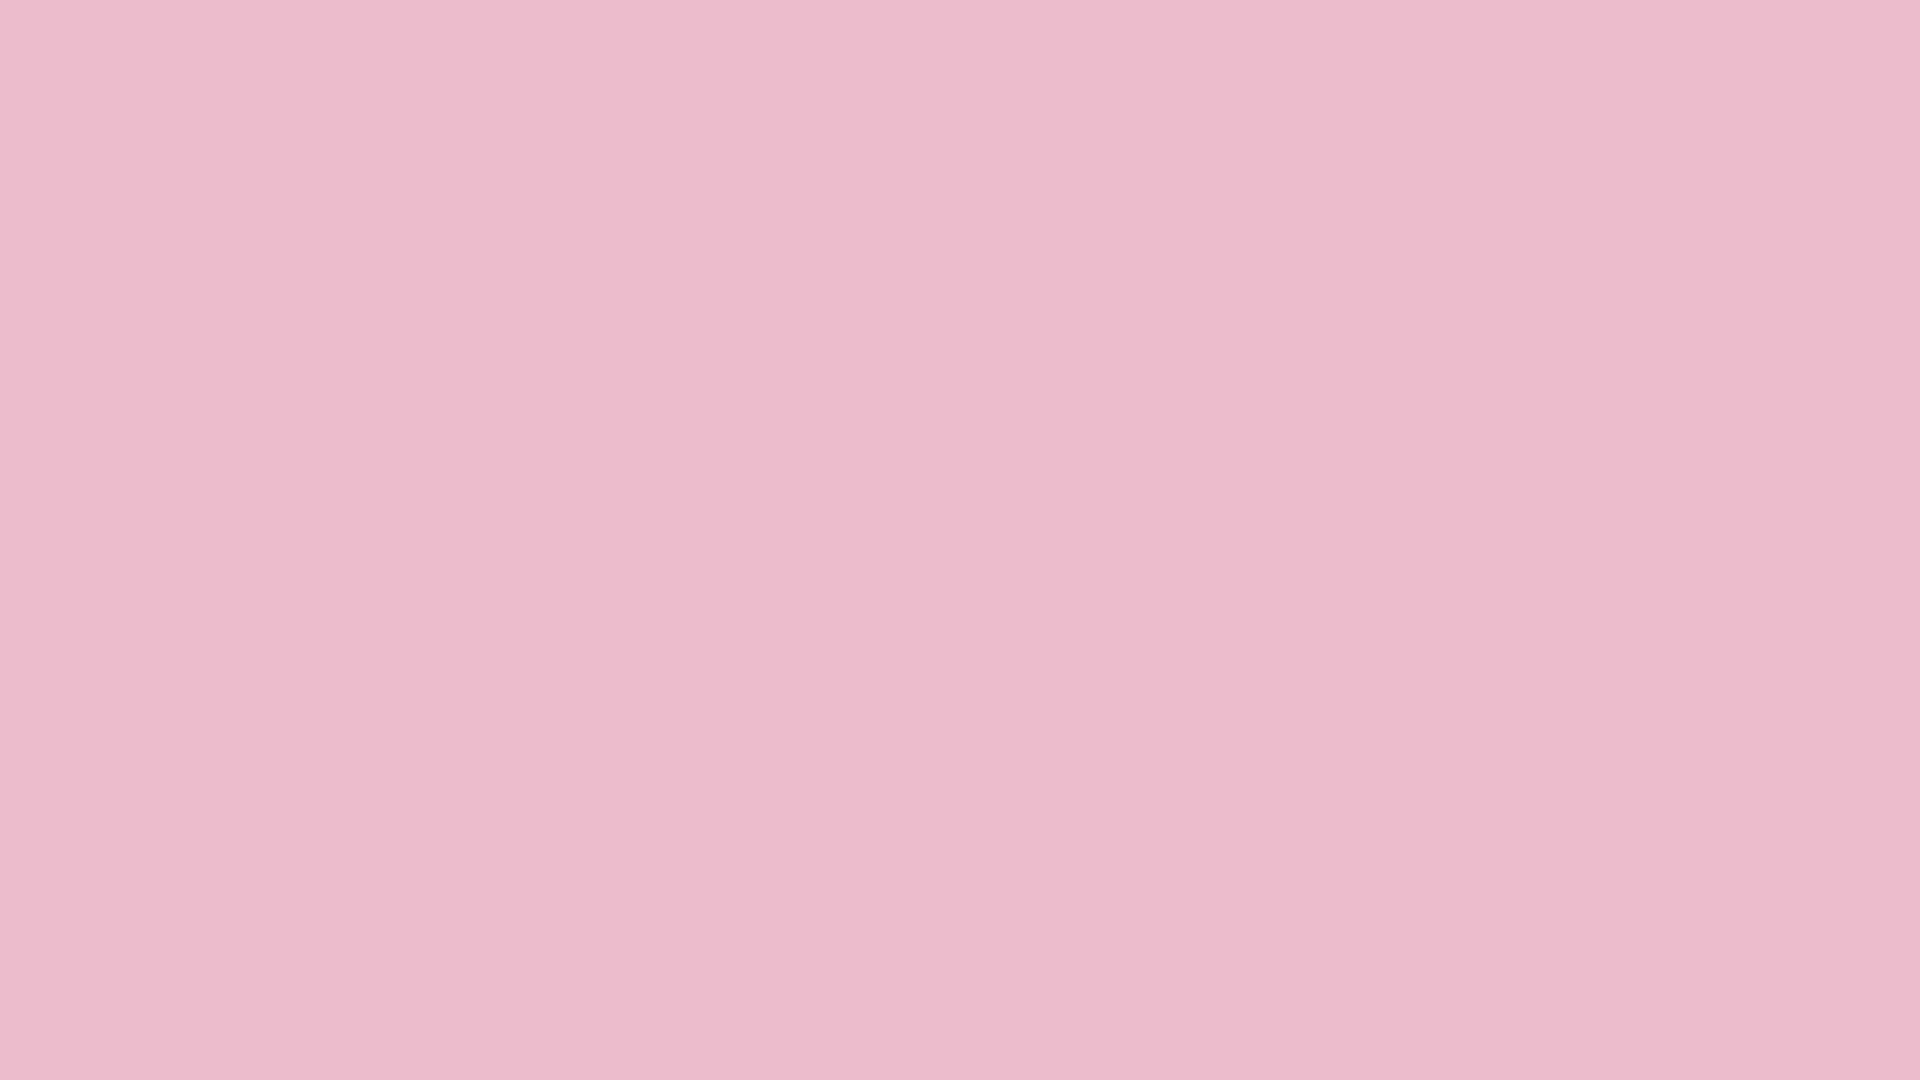 Plain color background featuring soft shades of pink